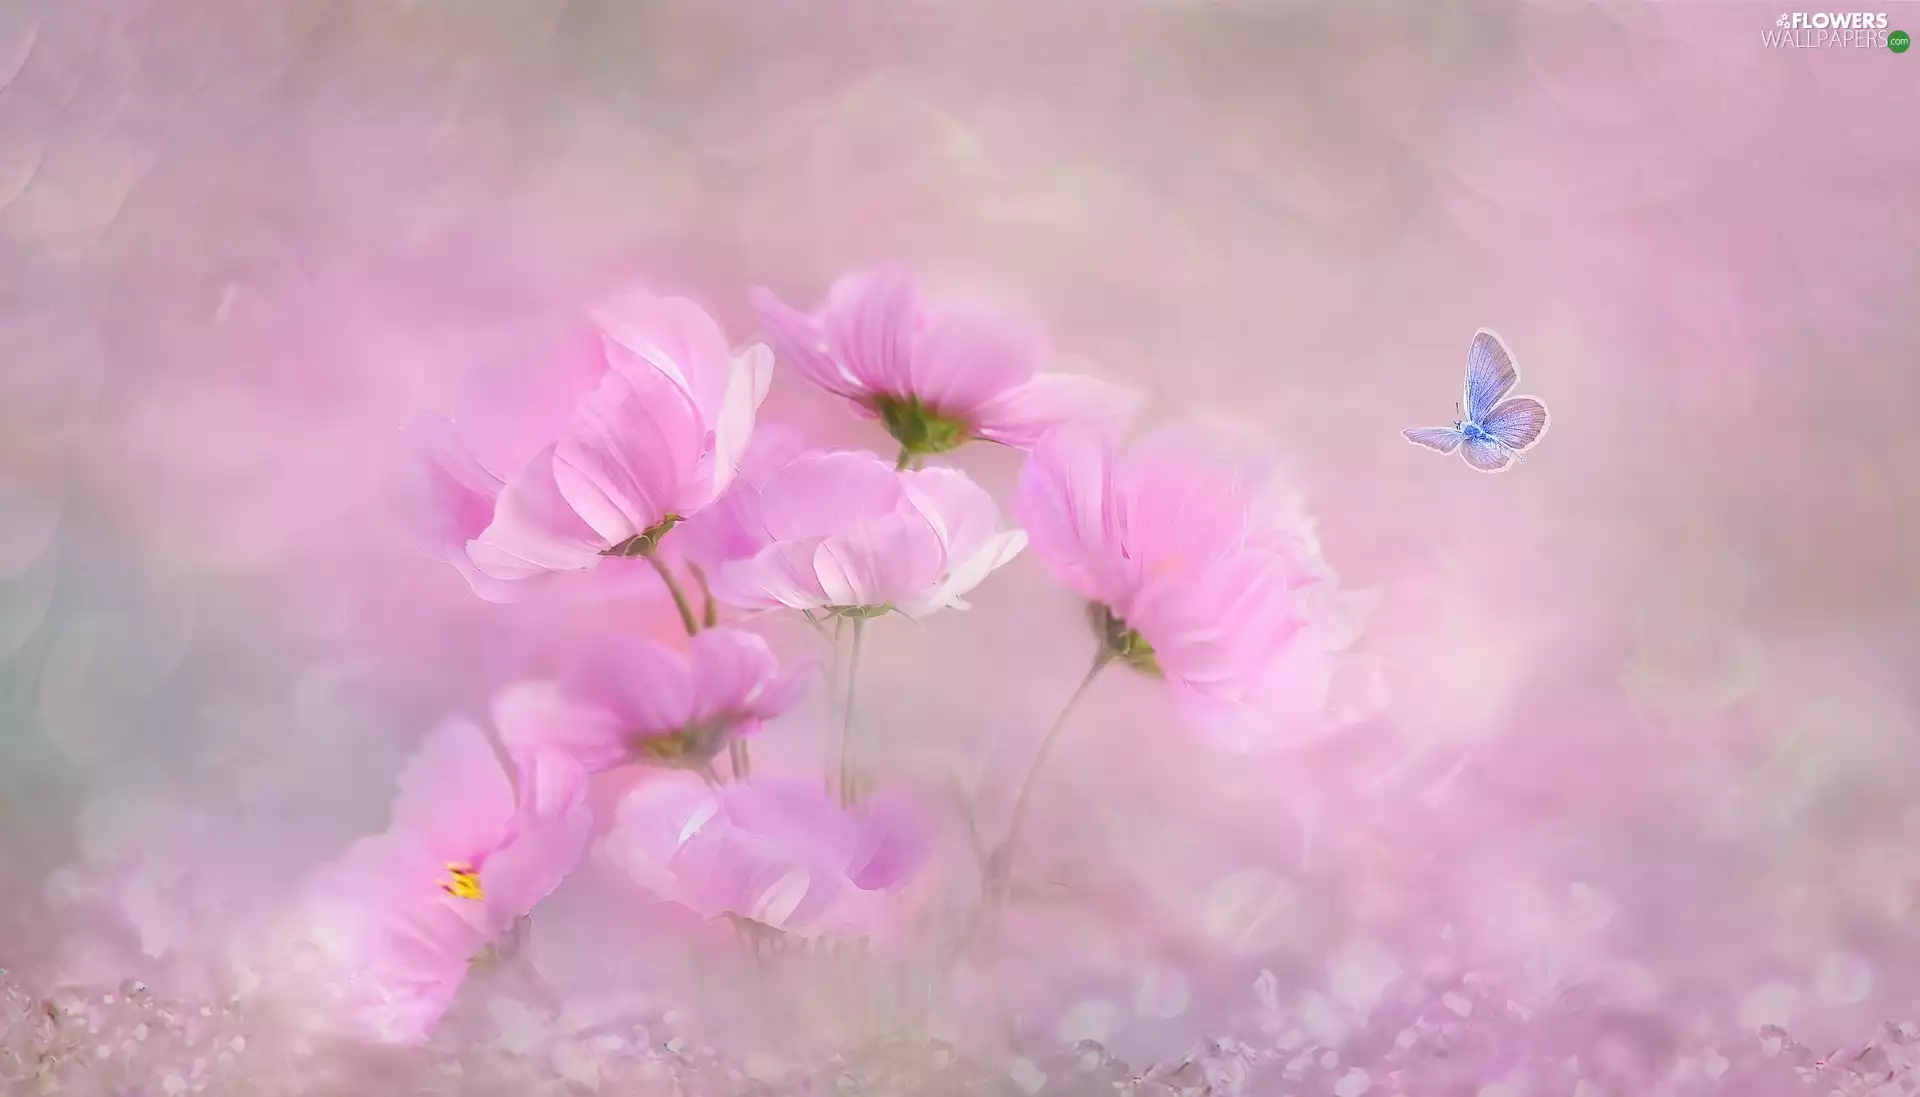 butterfly, Dusky Icarus, Flowers, Cosmos, Pink